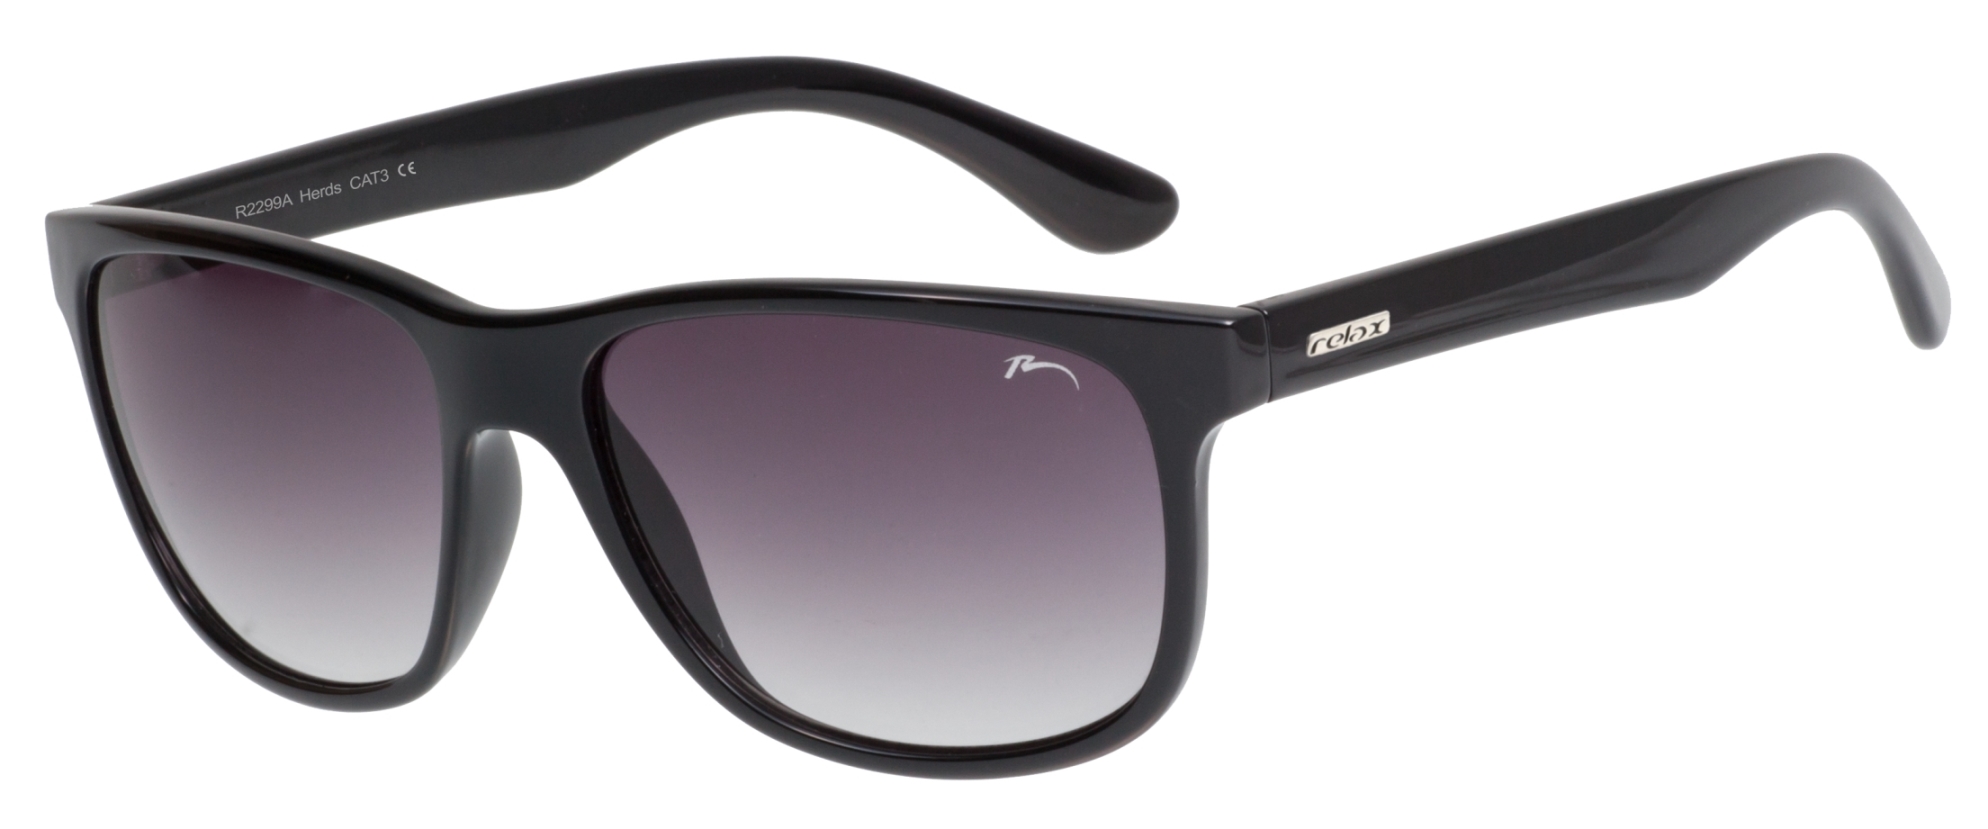 Polarized sunglasses  Relax Herds R2299A standard